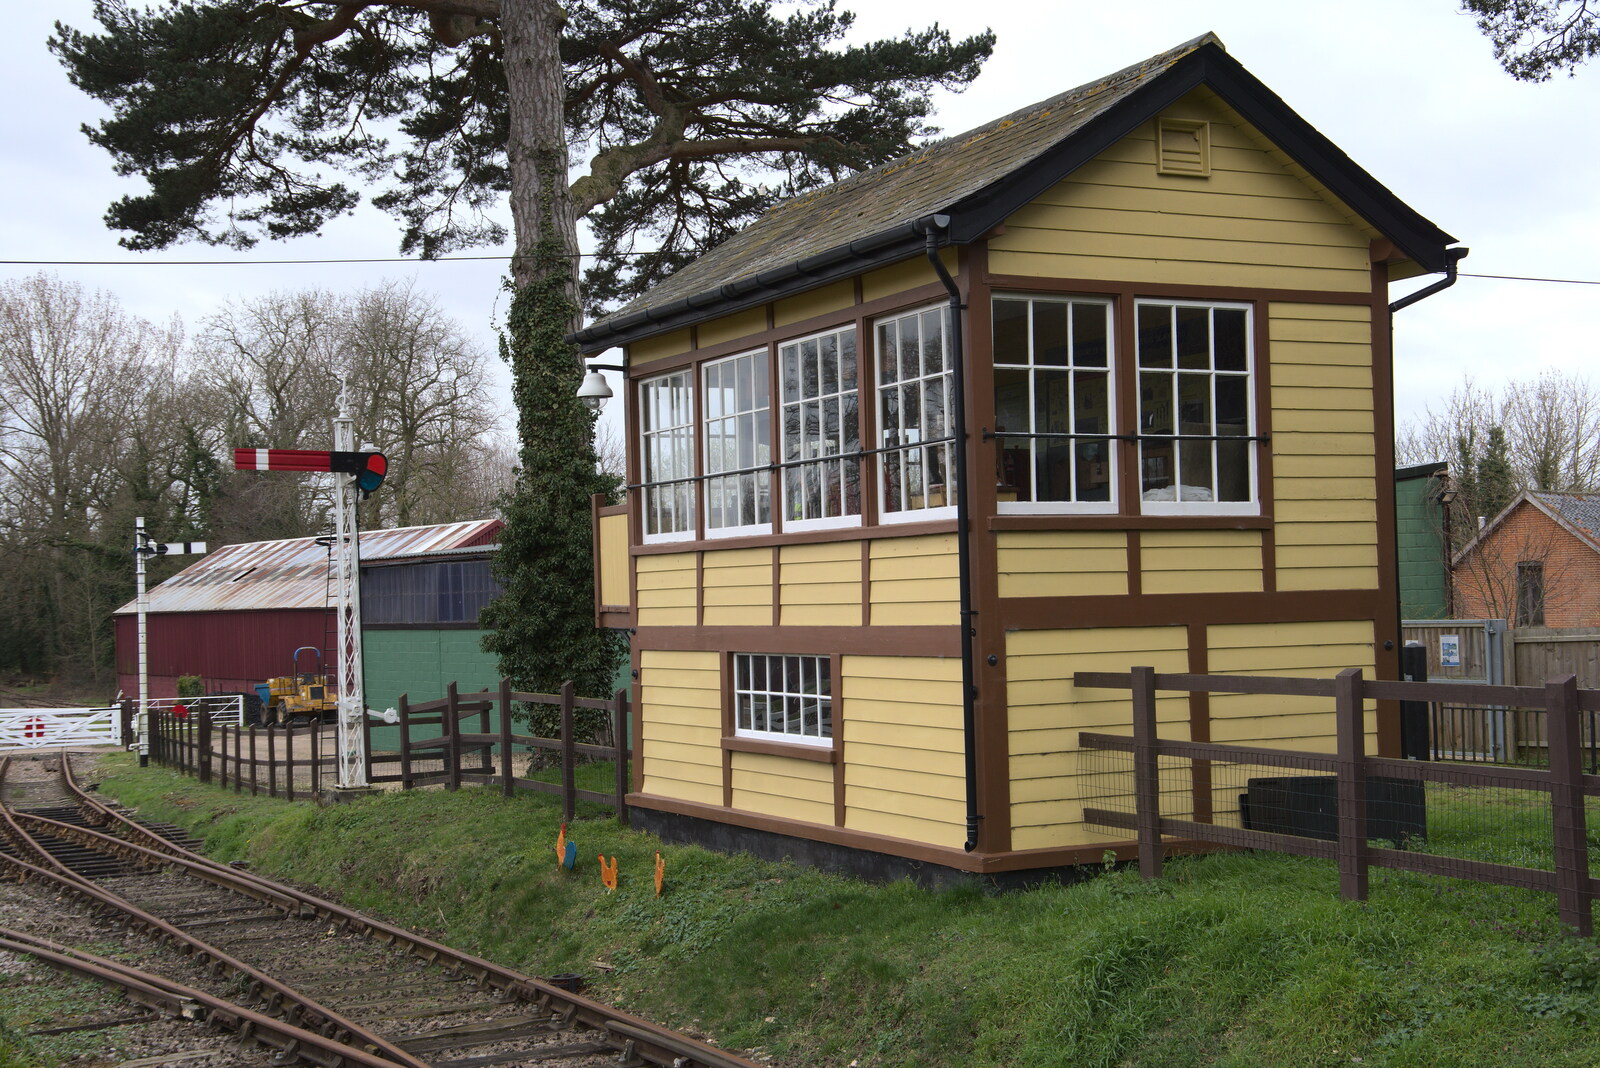 The Bressingham signal box from A Return to Bressingham Steam and Gardens, Bressingham, Norfolk - 28th March 2021